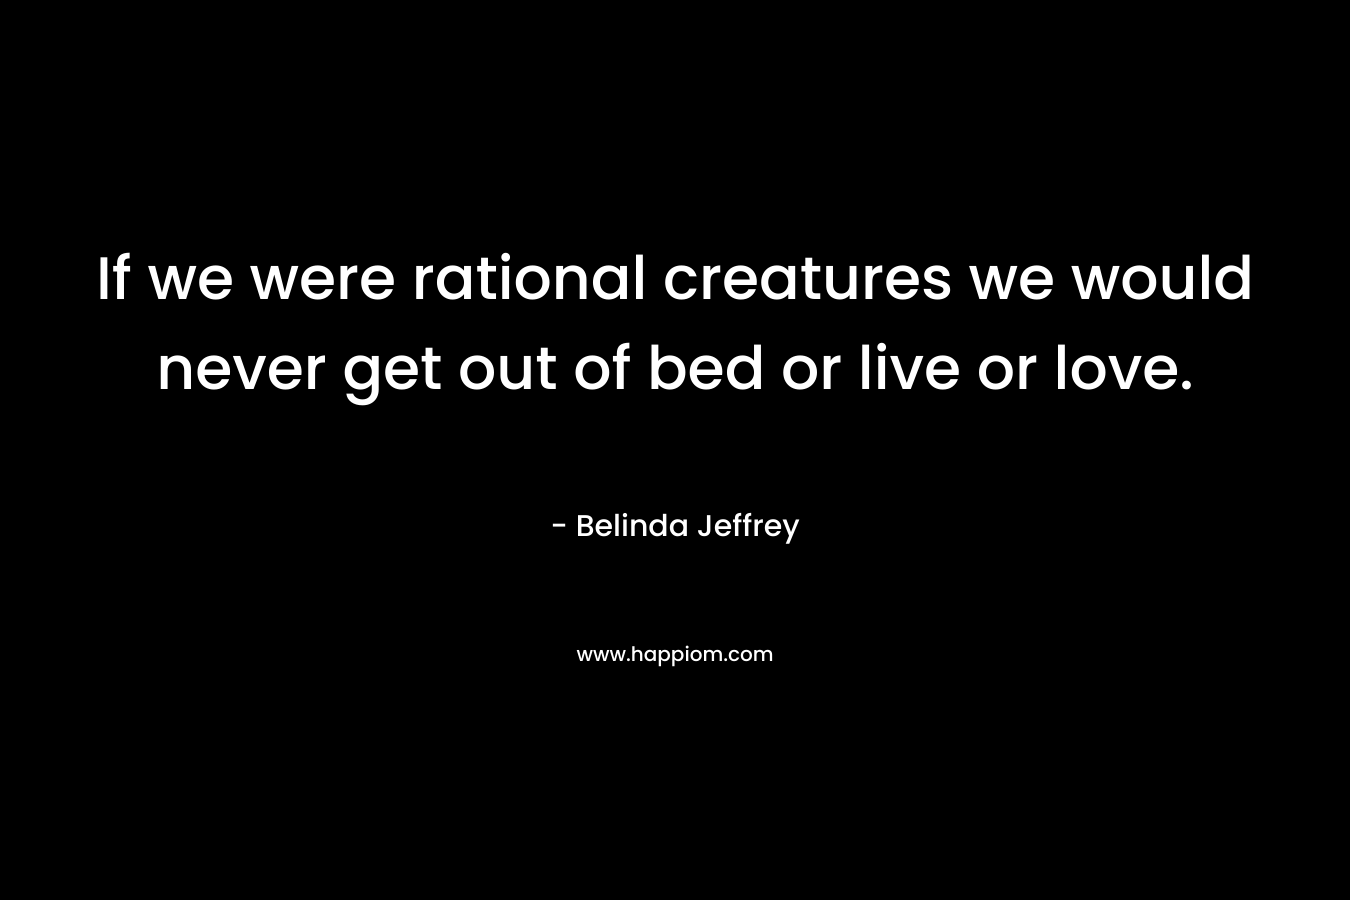 If we were rational creatures we would never get out of bed or live or love. – Belinda Jeffrey